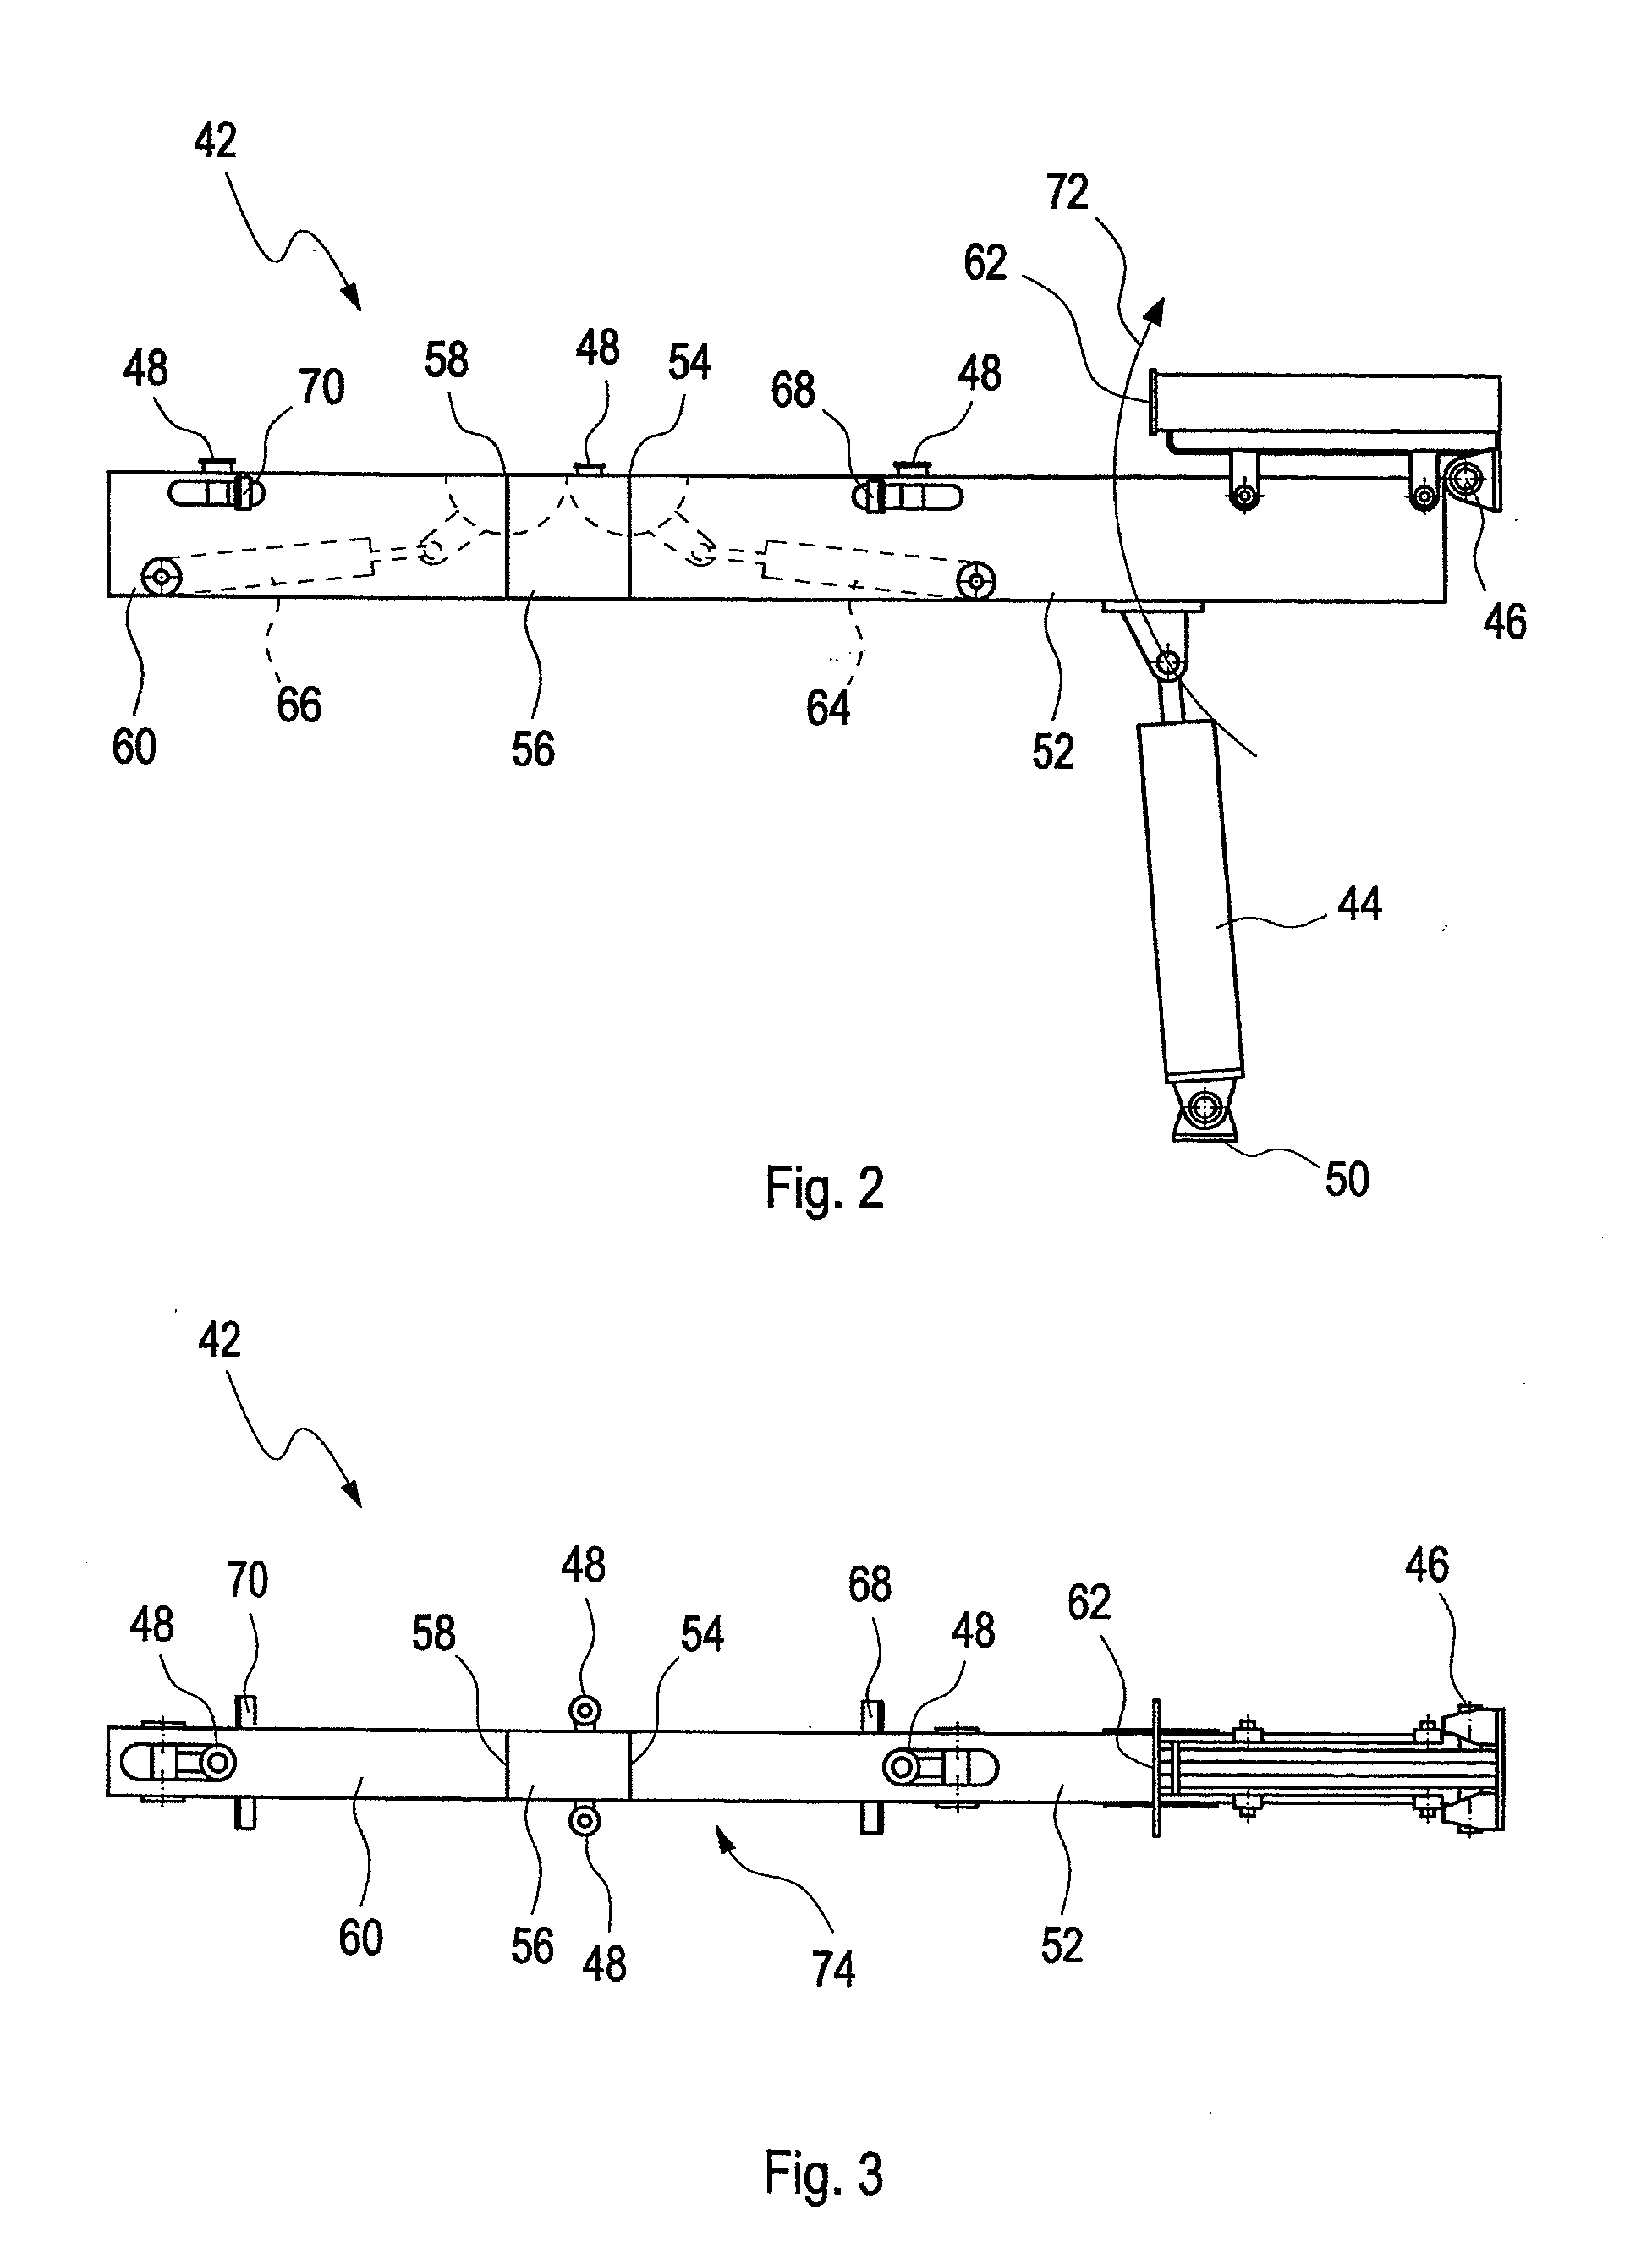 Apparatus for packaging flat articles